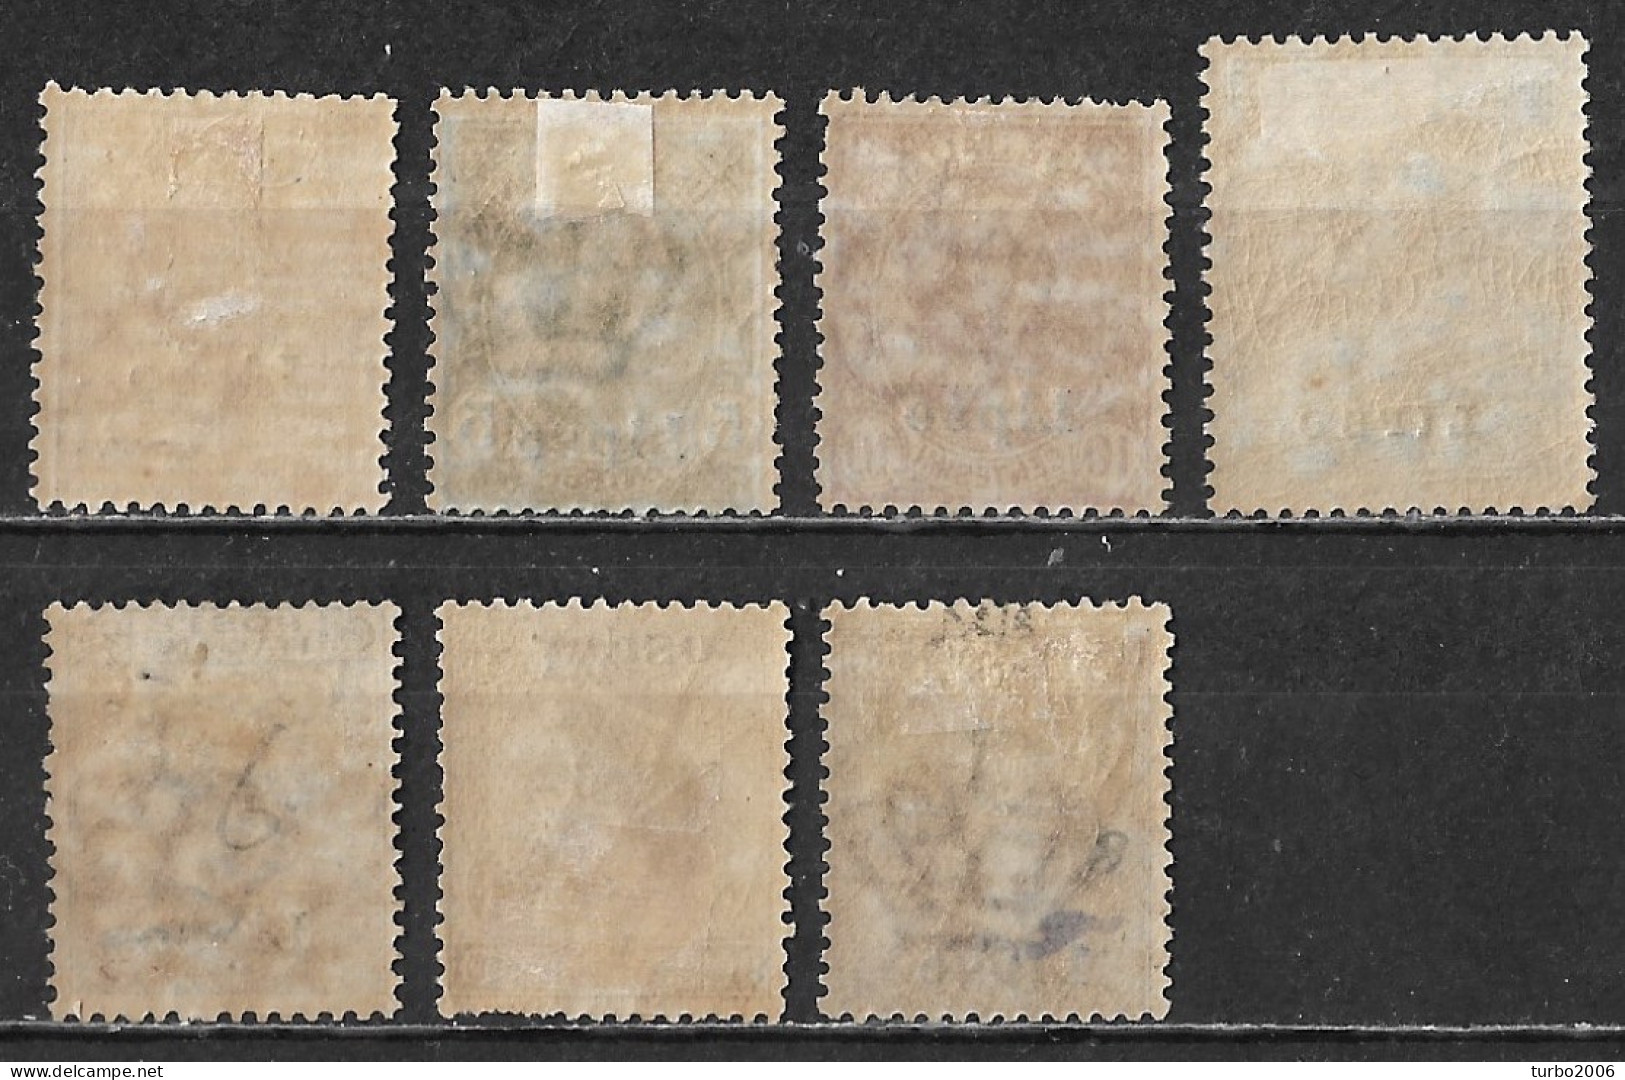 DODECANESE 1912 Italian Stamps With Black Overprint LIPSO Complete MH Set Vl. 1 / 7 - Dodekanesos